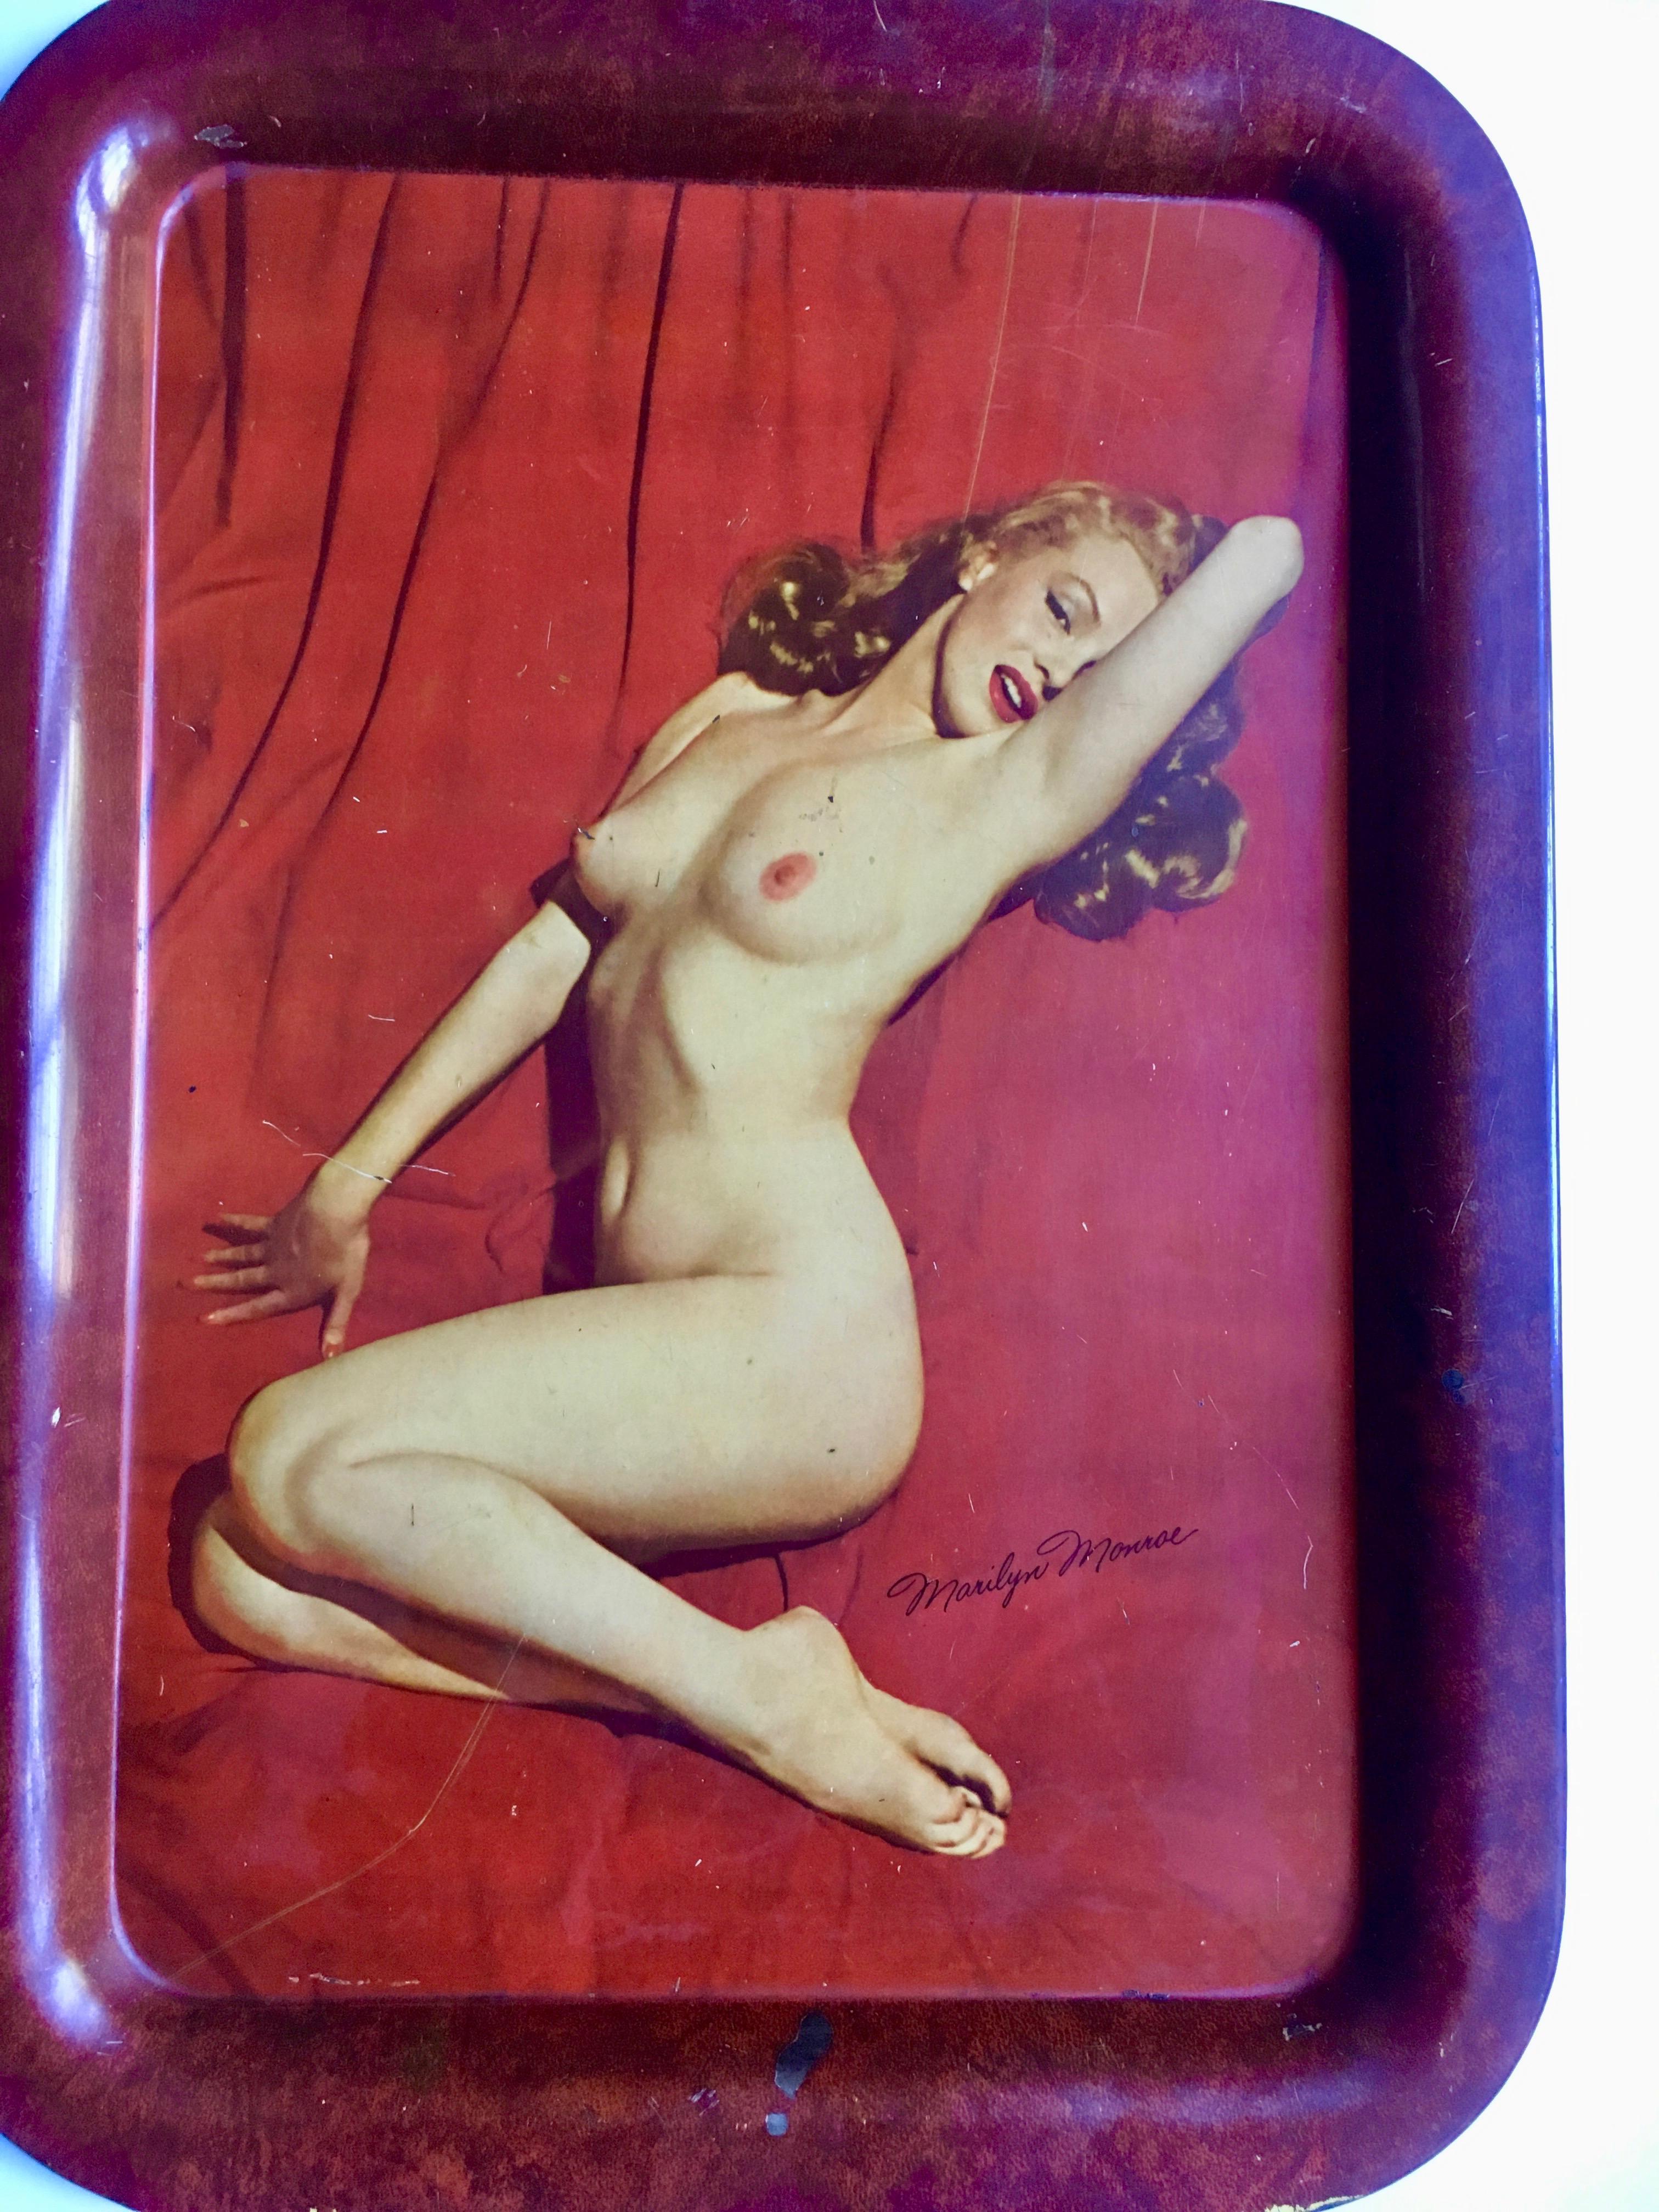 Quite possibly the most famous nude images ever, Marilyn Monroe's nude images as then, Norma Jean Baker. The trays are original from the 1950s
A must have for the collector, especially those that entertain or like sex.